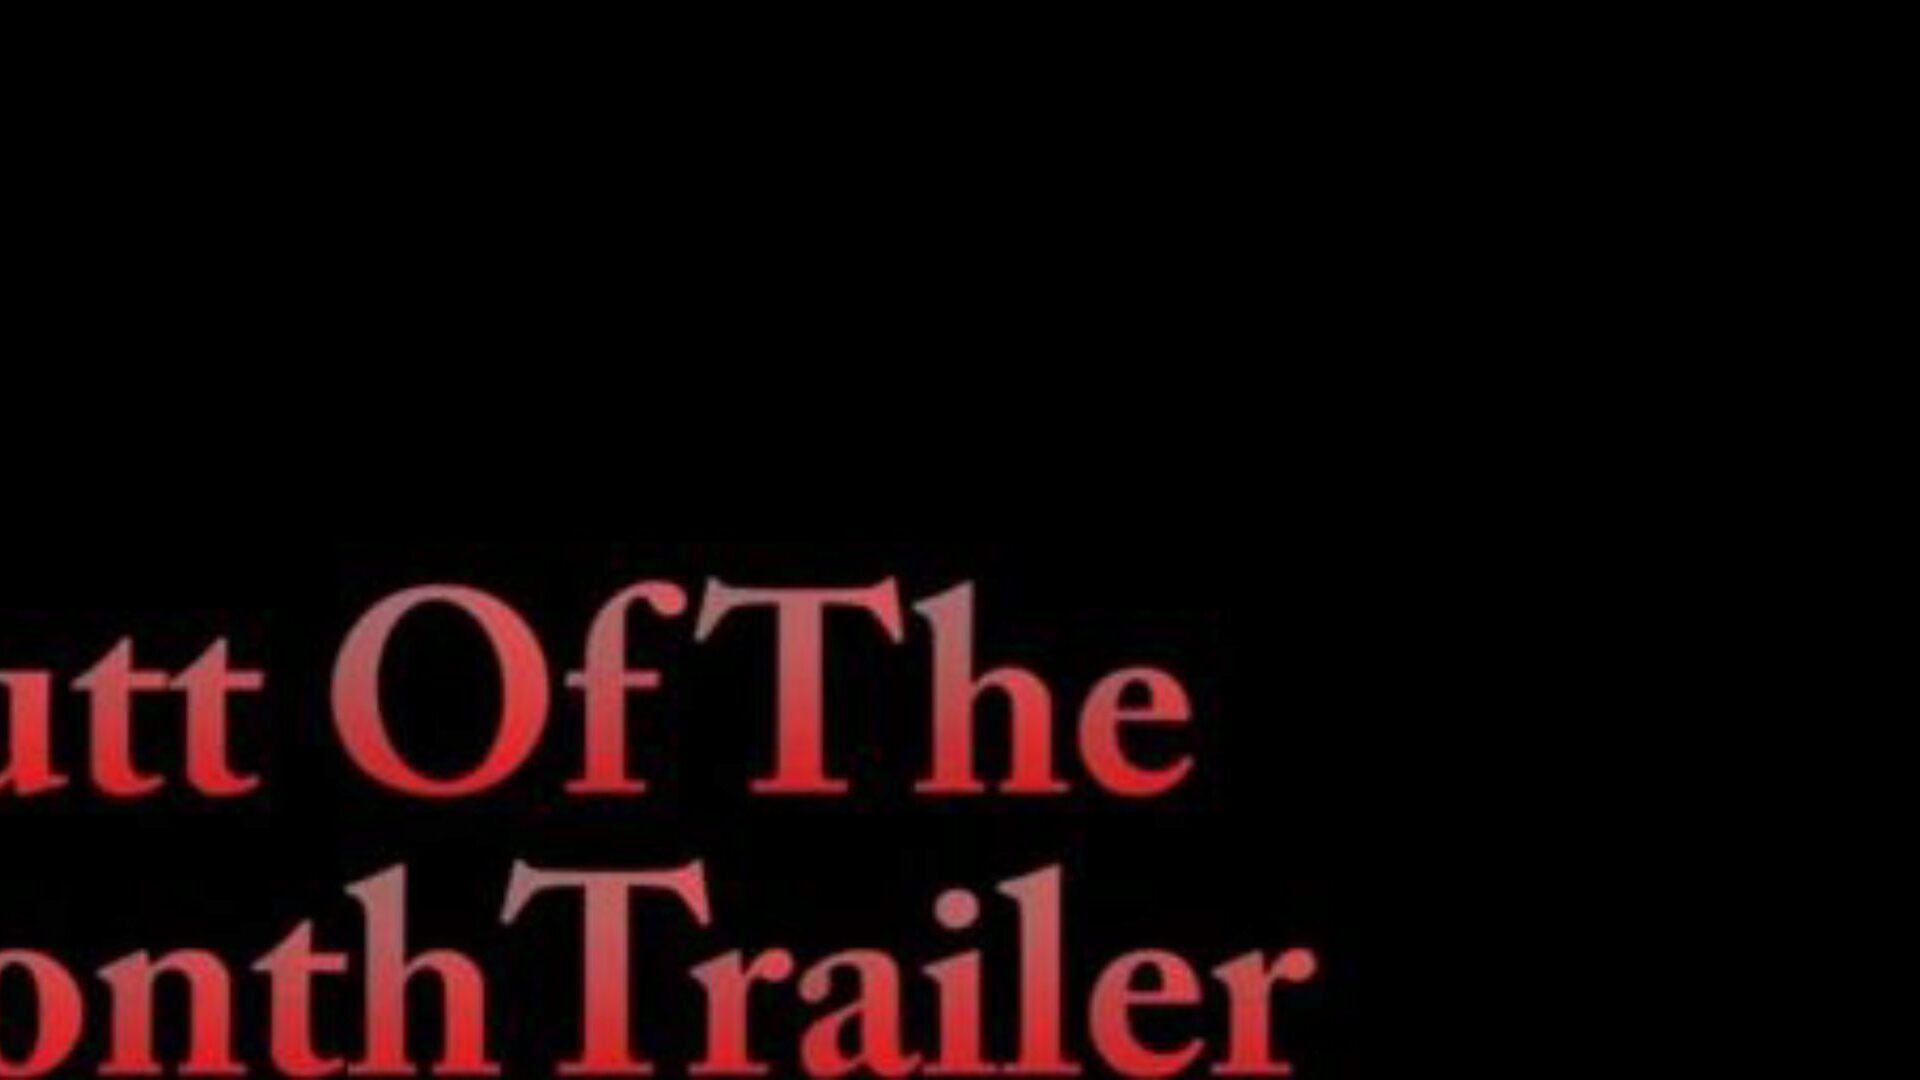 Arse Of The Month Violet Myers Trailer